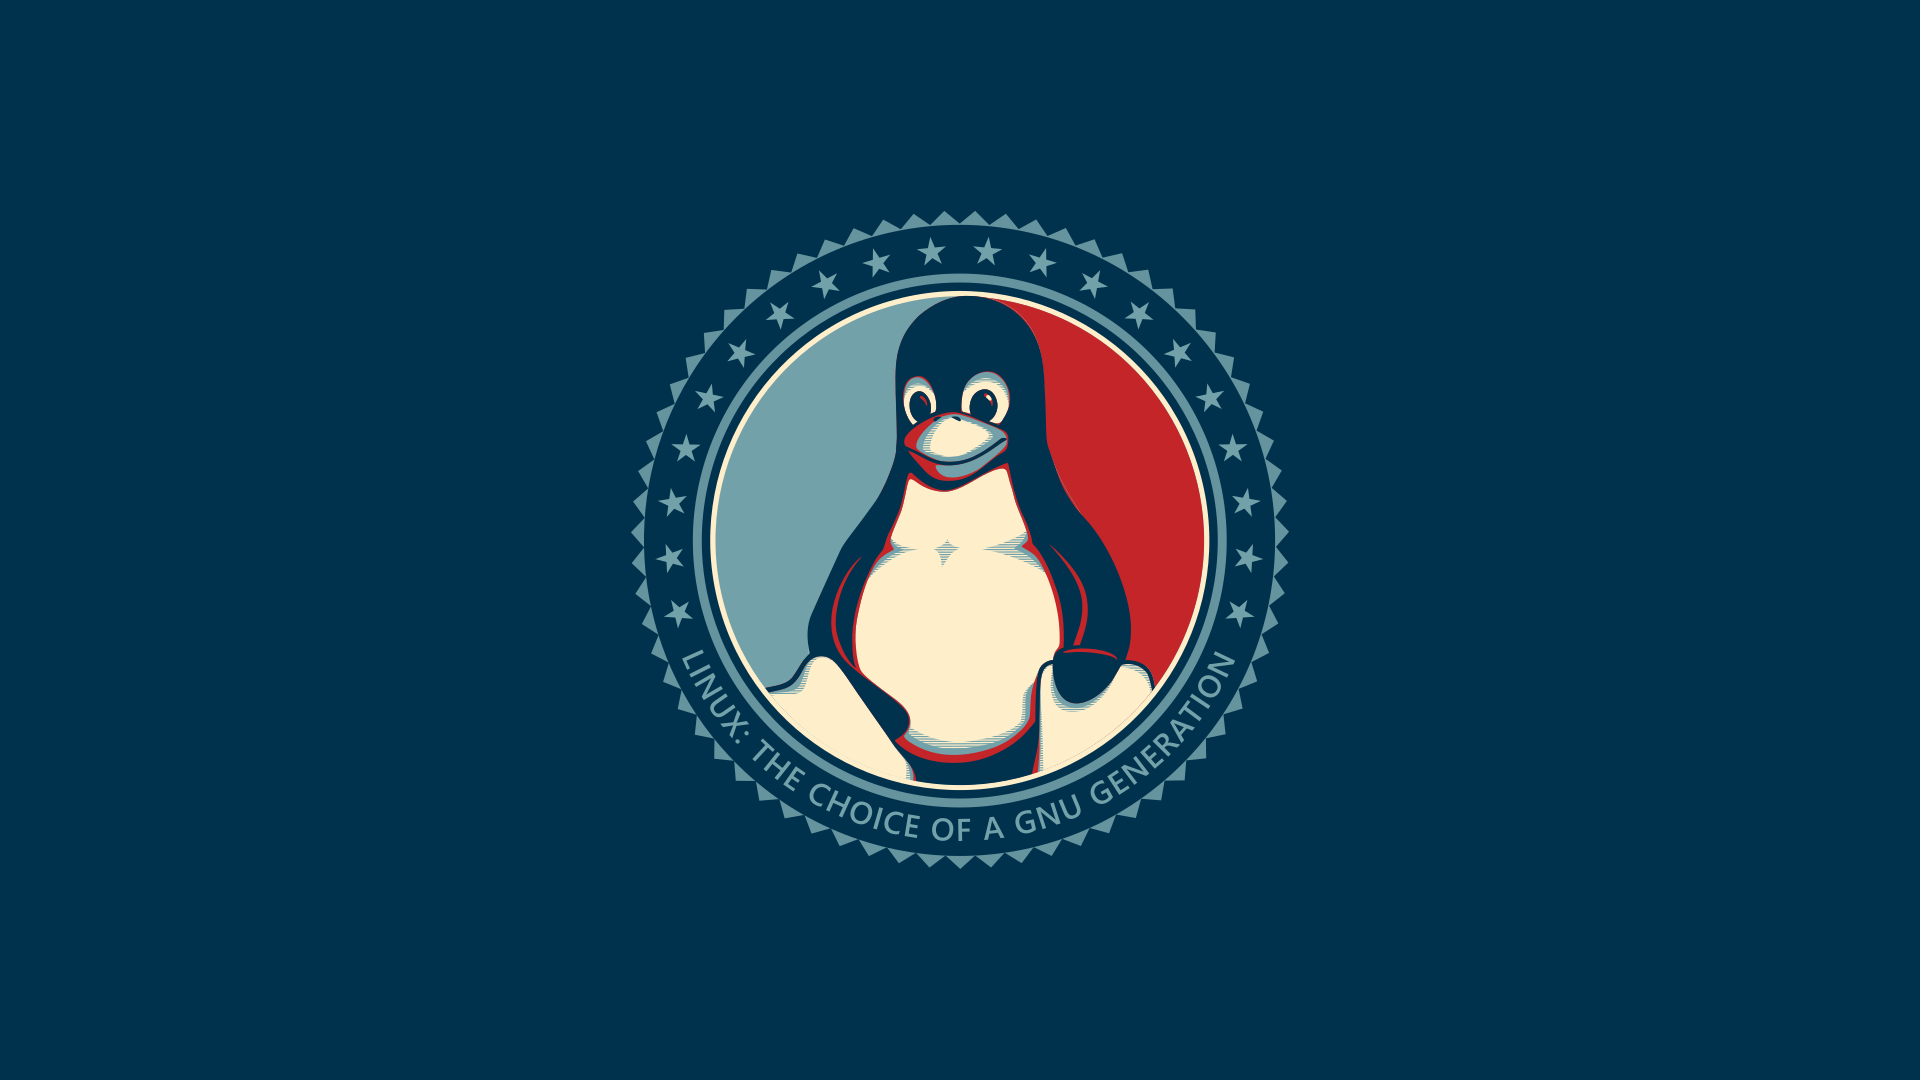 Tux Wallpapers